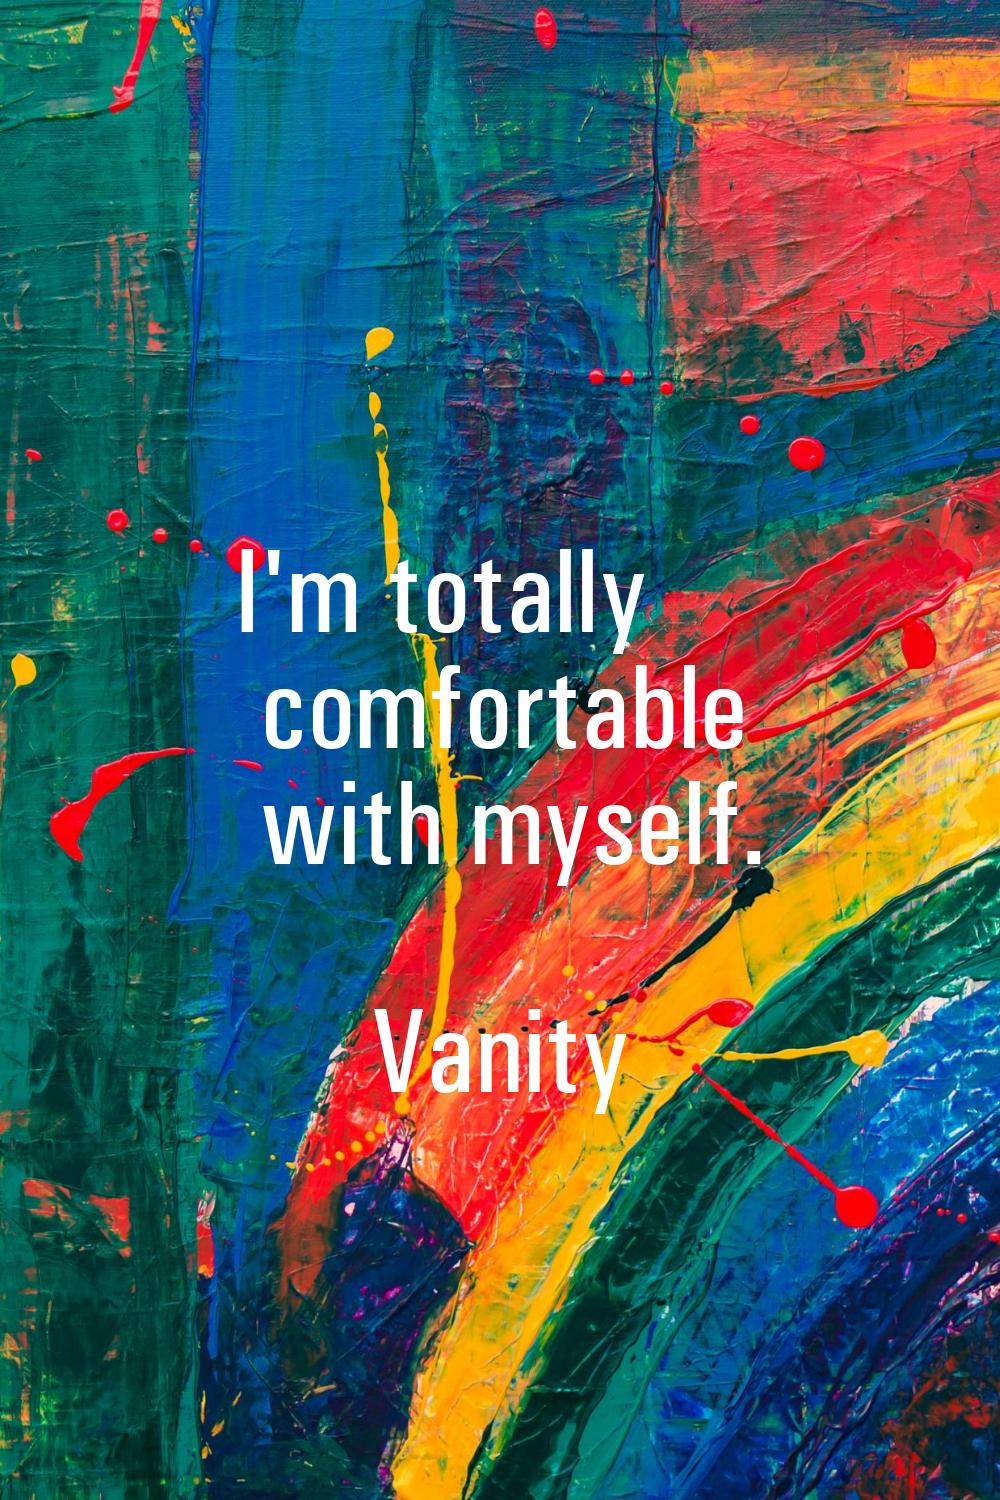 I'm totally comfortable with myself.